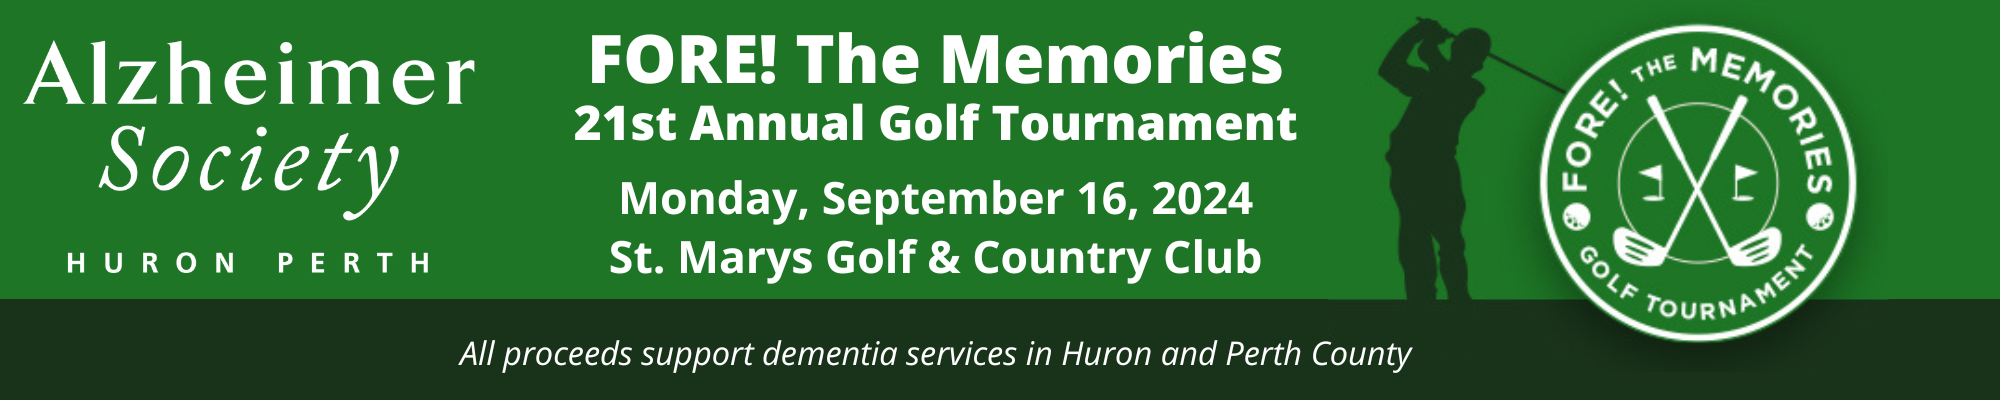 FORE! The Memories 21st Annual Golf Tournament